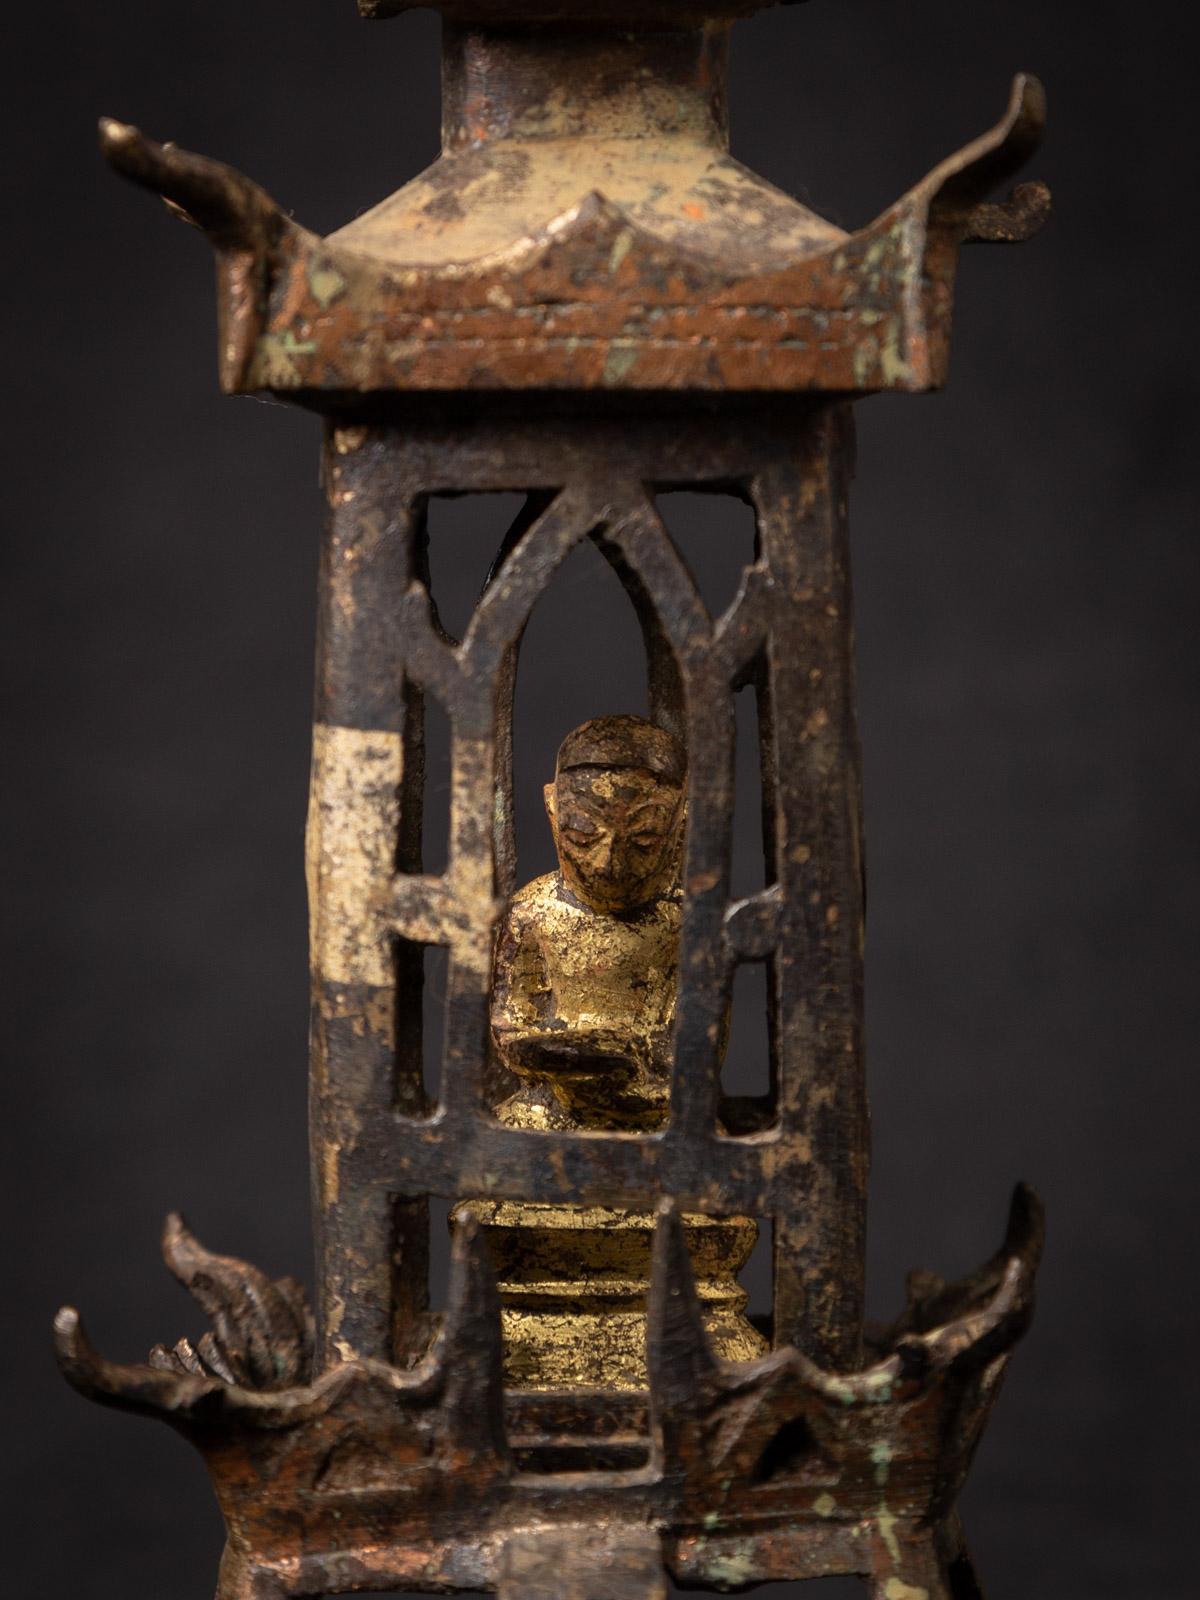 Antique bronze Burmese Shan shrine
Material : bronze
30,9 cm high
9,2 cm wide and 10,5 cm deep
With traces of 24 krt. gilding
Shan (Tai Yai) style
18th century
With a bronze Monk statue inside the shrine
Weight: 970 grams
Originating from Burma
Nr: